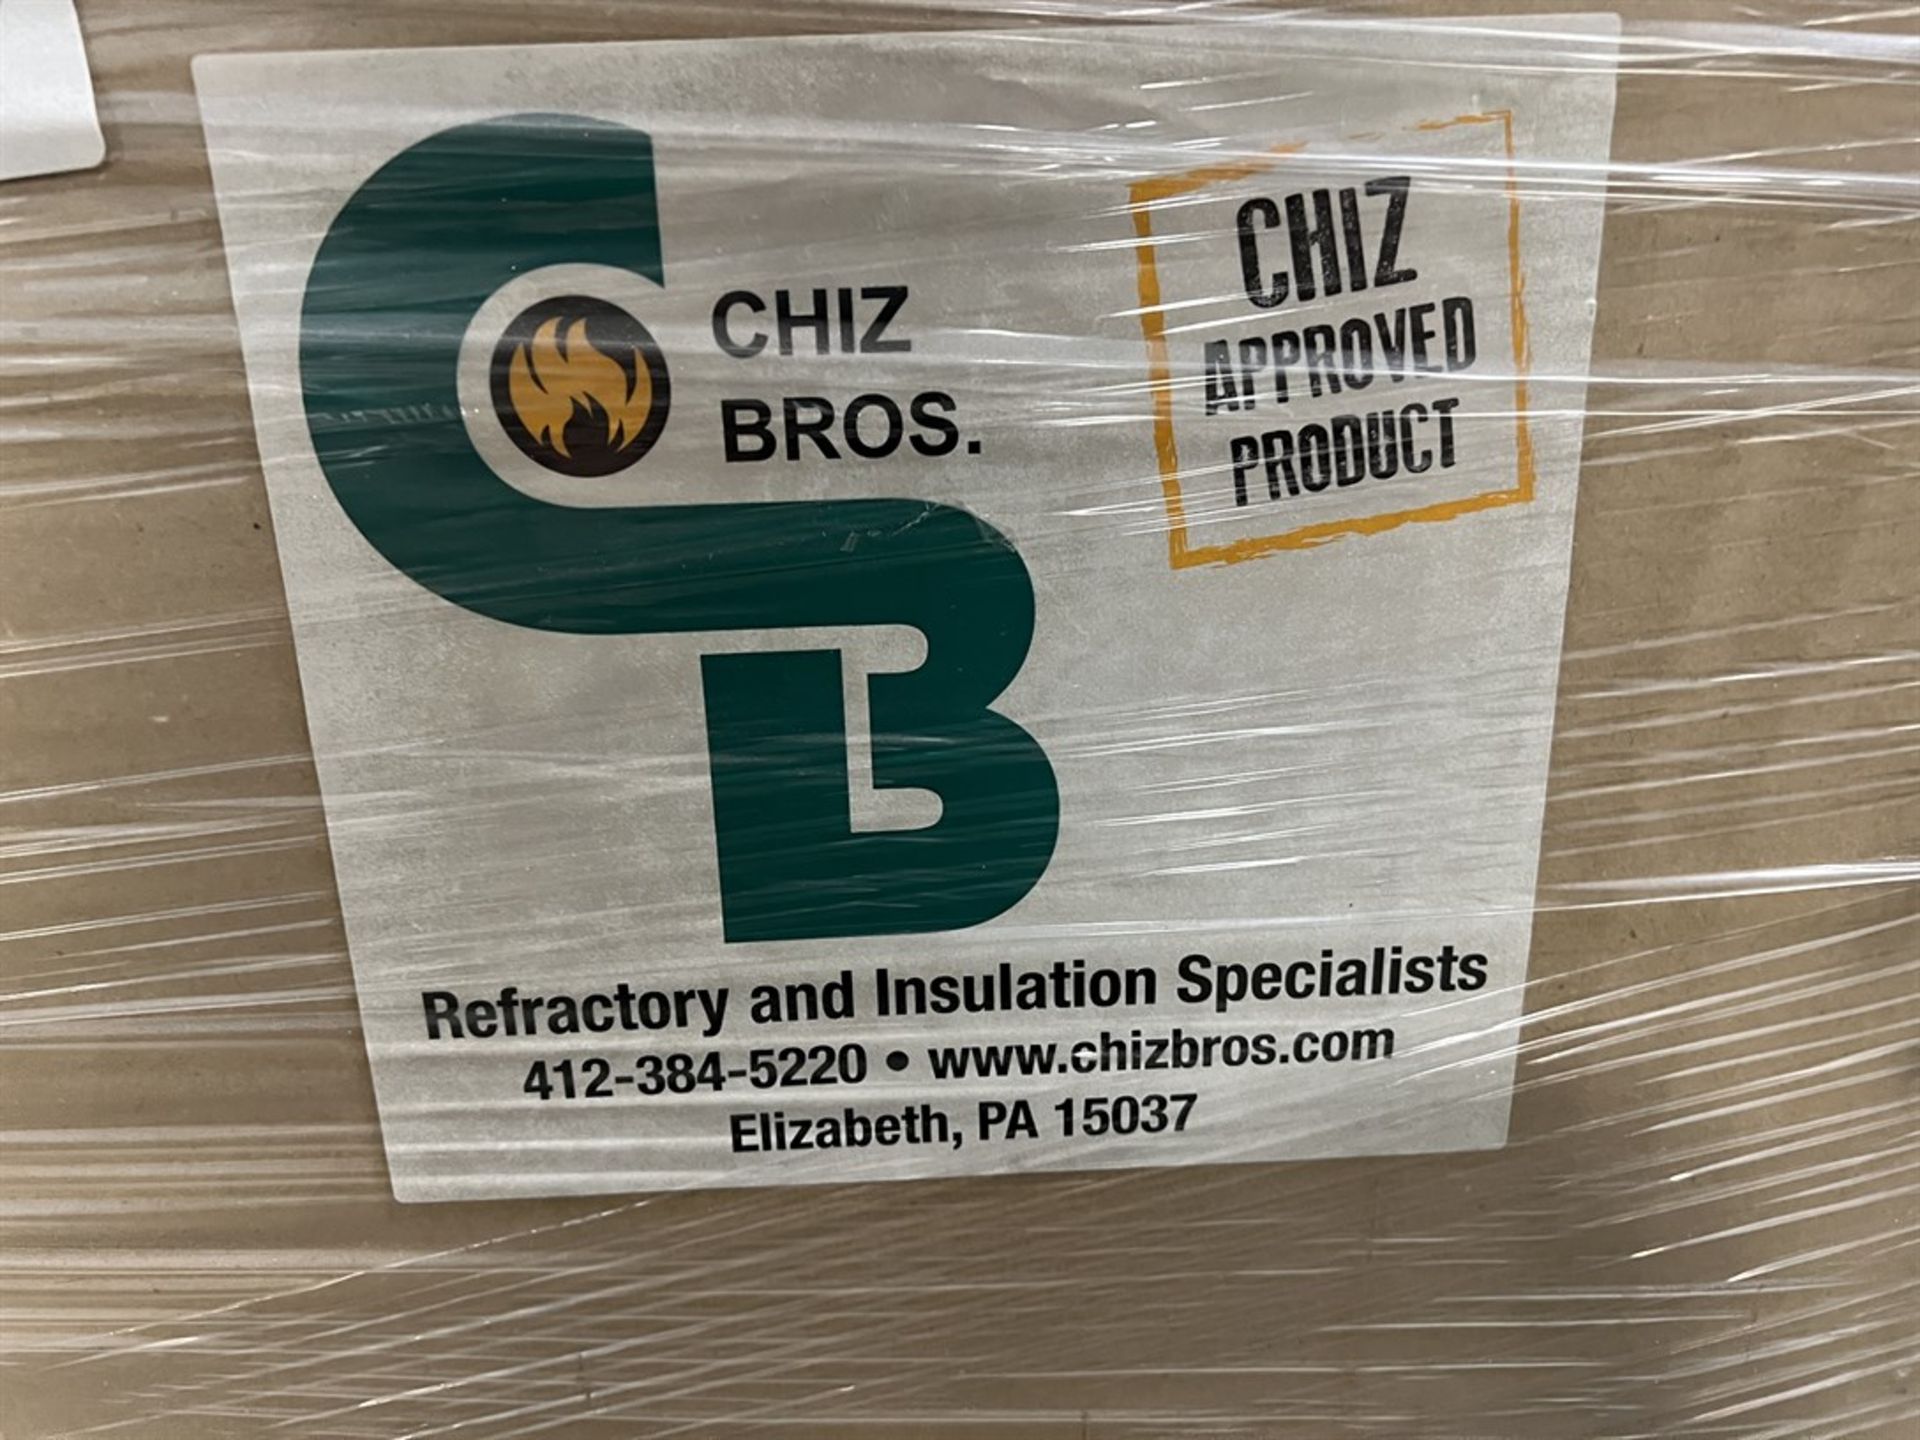 Lot of (3) Crates of CHIZ Bros CBI Hot Bloc, (2) 14 x 12 x 40 Notched and (1) 14 x 12' x 46 - Image 3 of 7